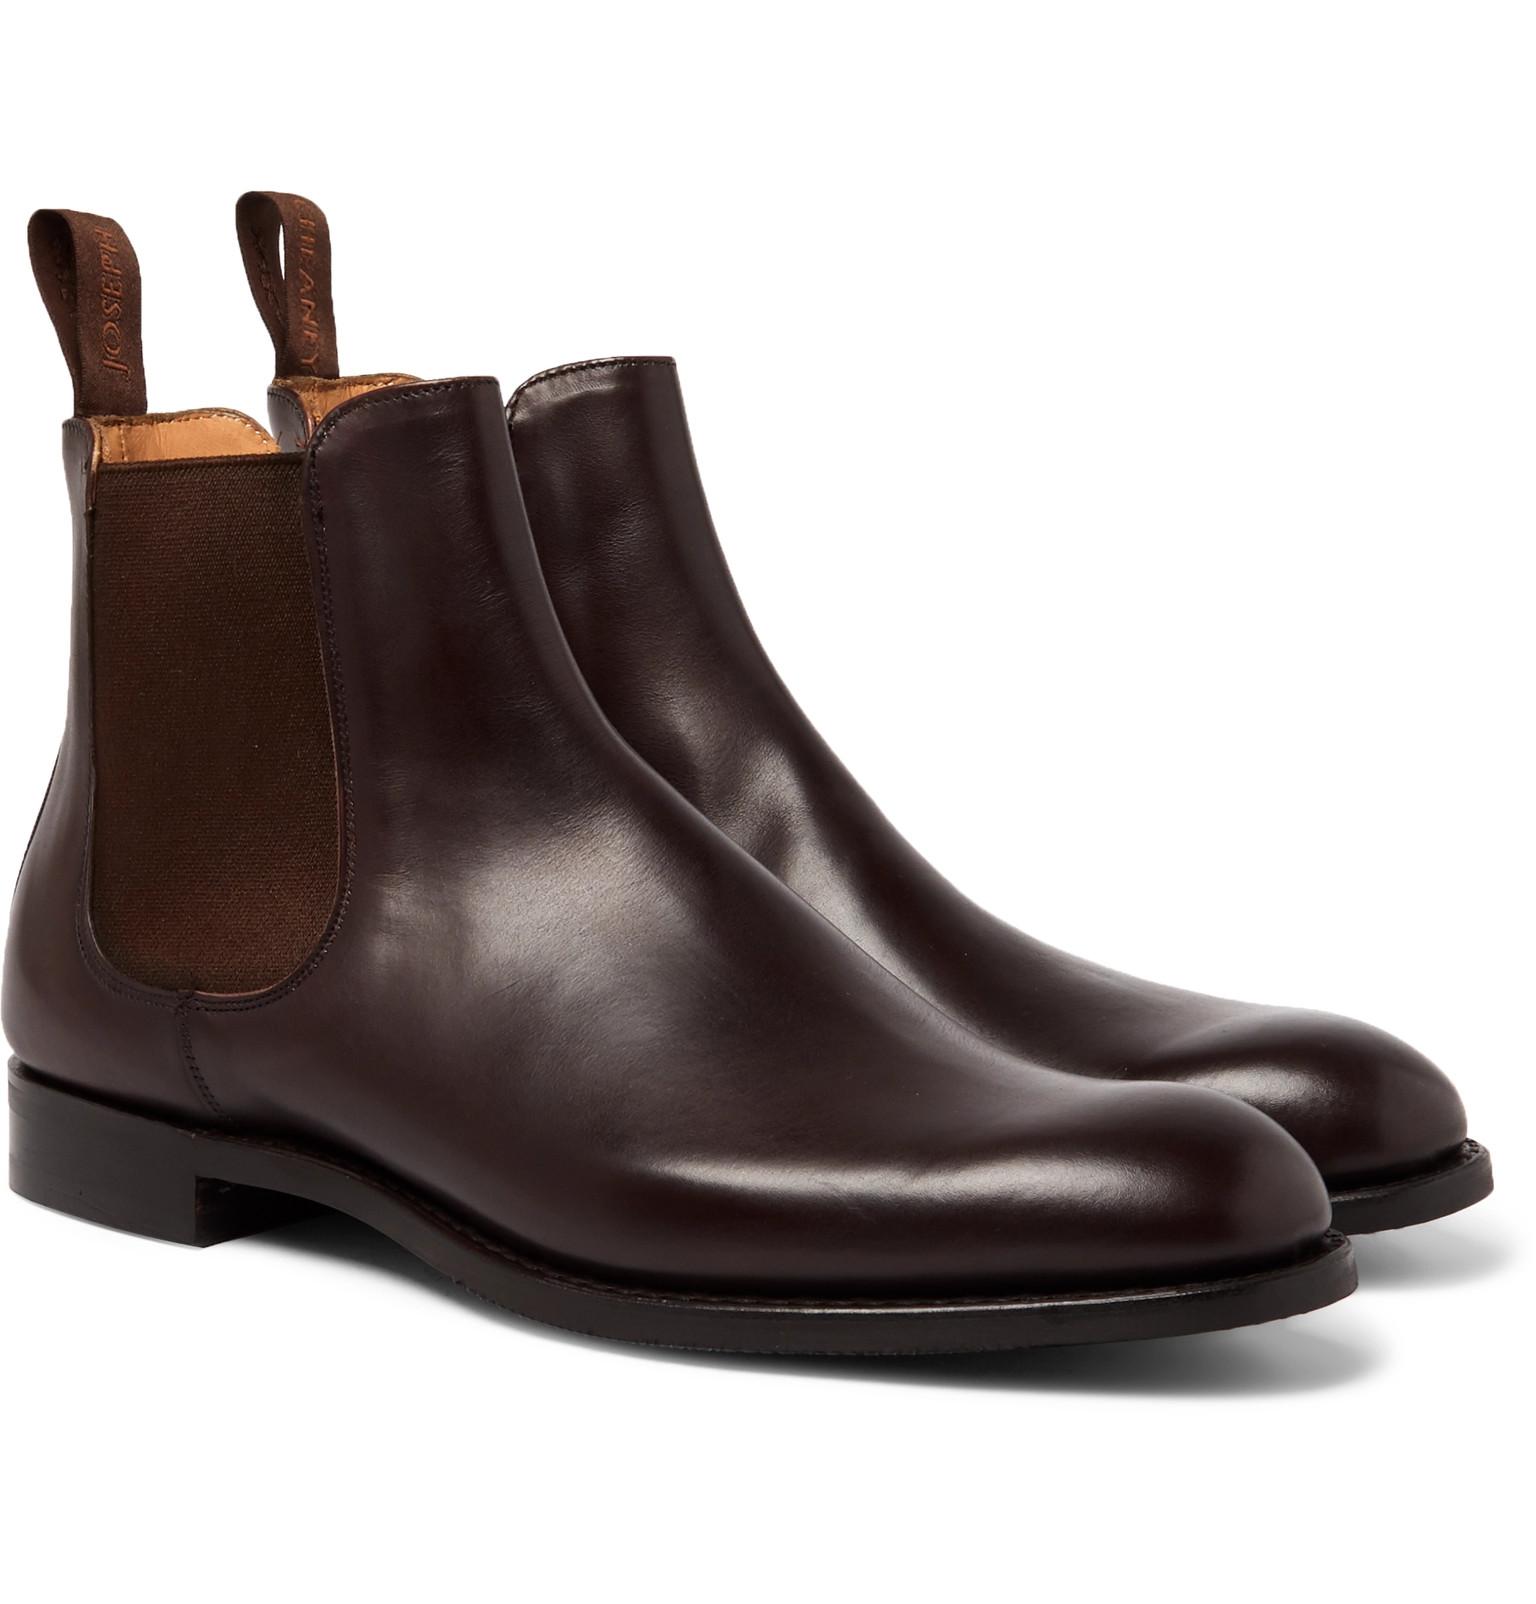 Cheaney Godfrey Leather Chelsea Boots in Brown for Men - Lyst